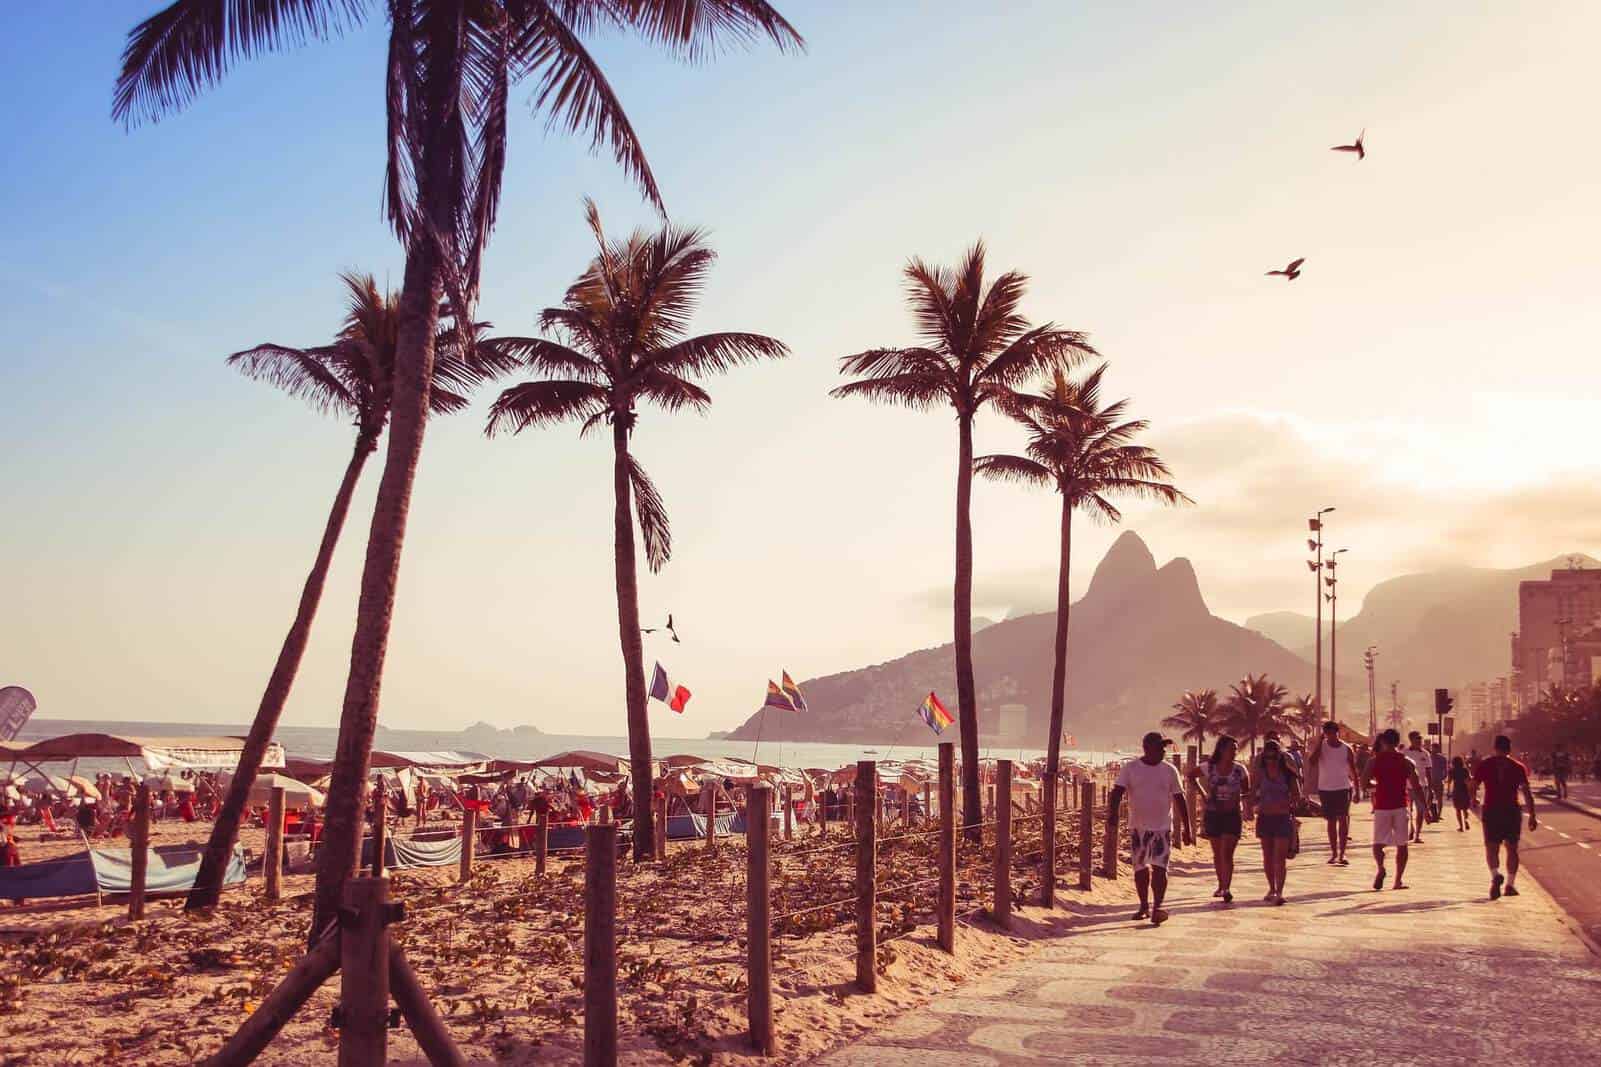 10 Insanely Beautiful Beaches in Brazil